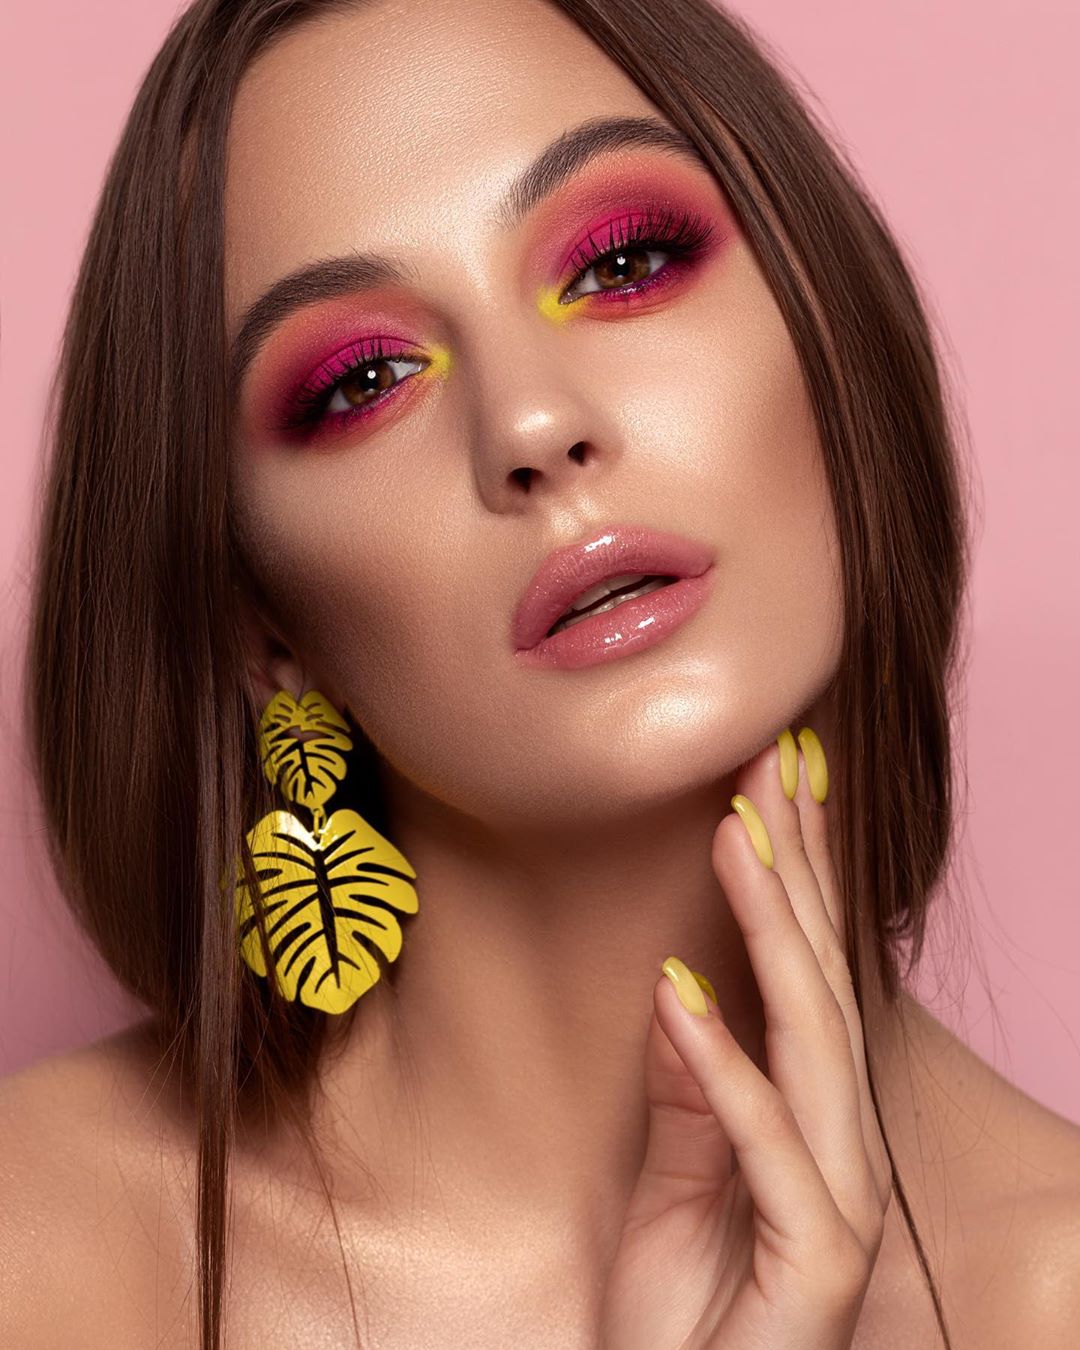 Beautiful Lady With Pink And Yellow Creative Make Up